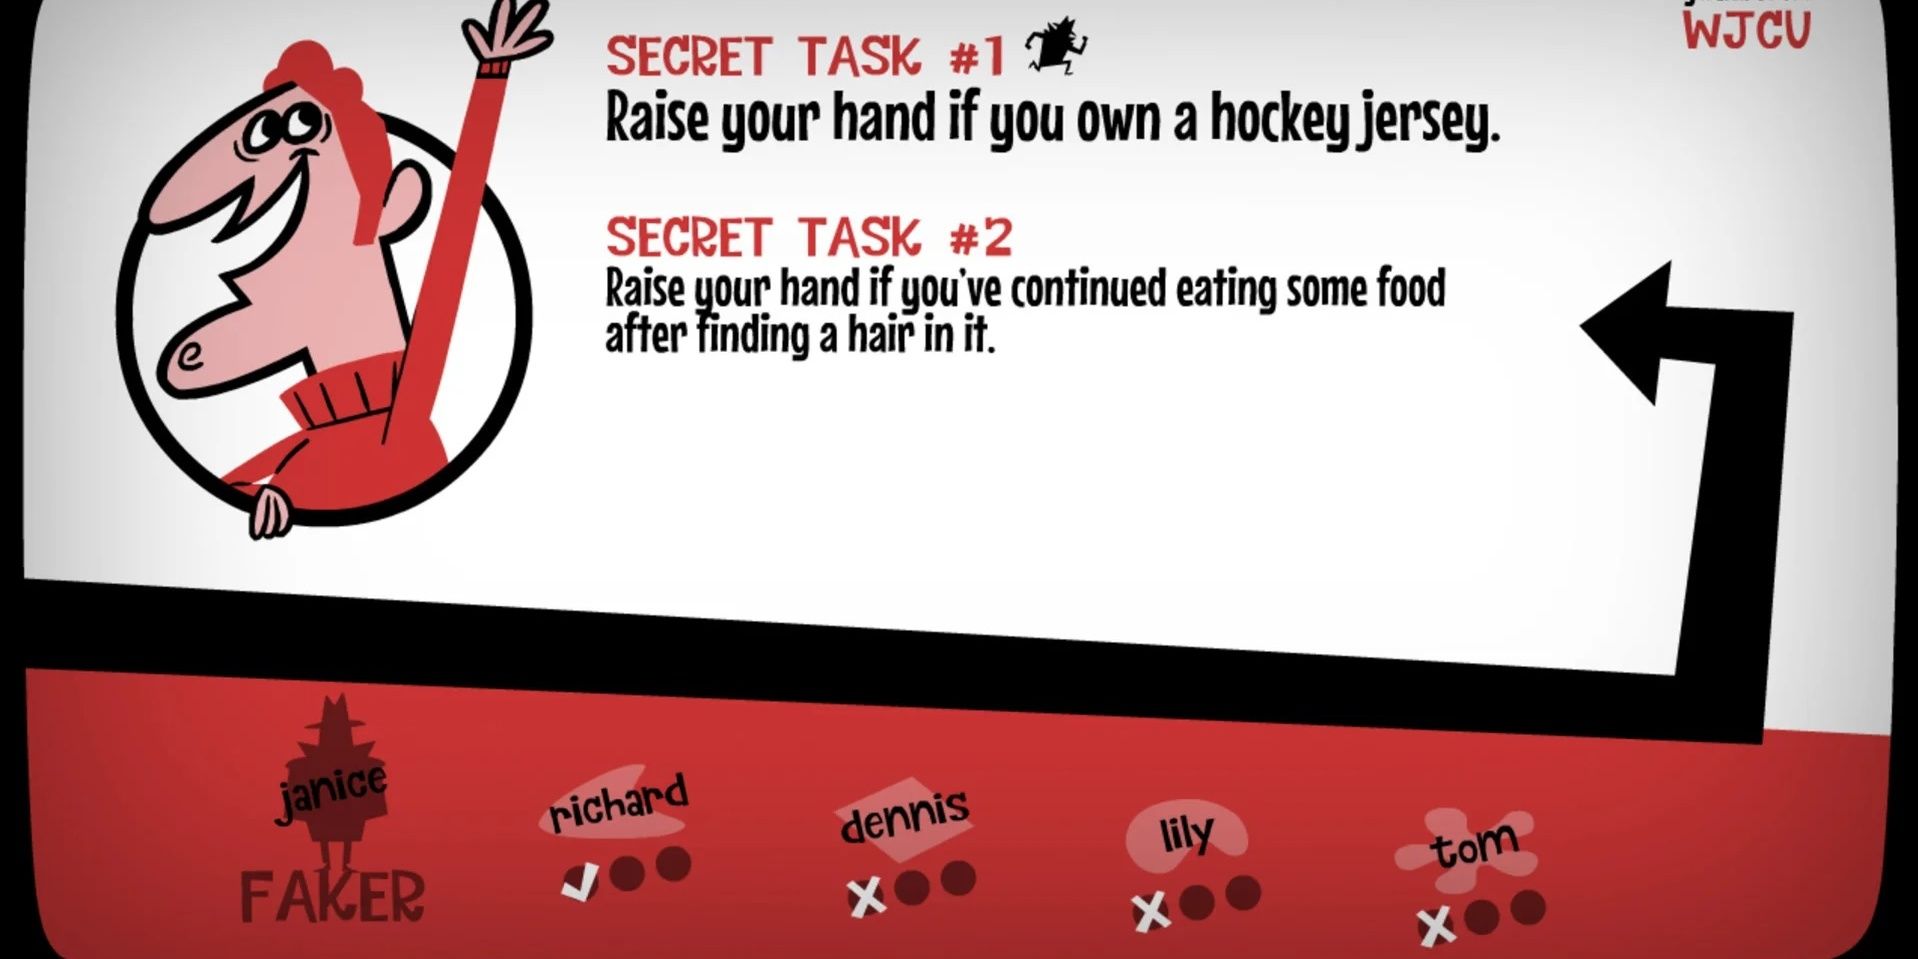 Fakin It gameplay from the Jackbox Party Pack 3